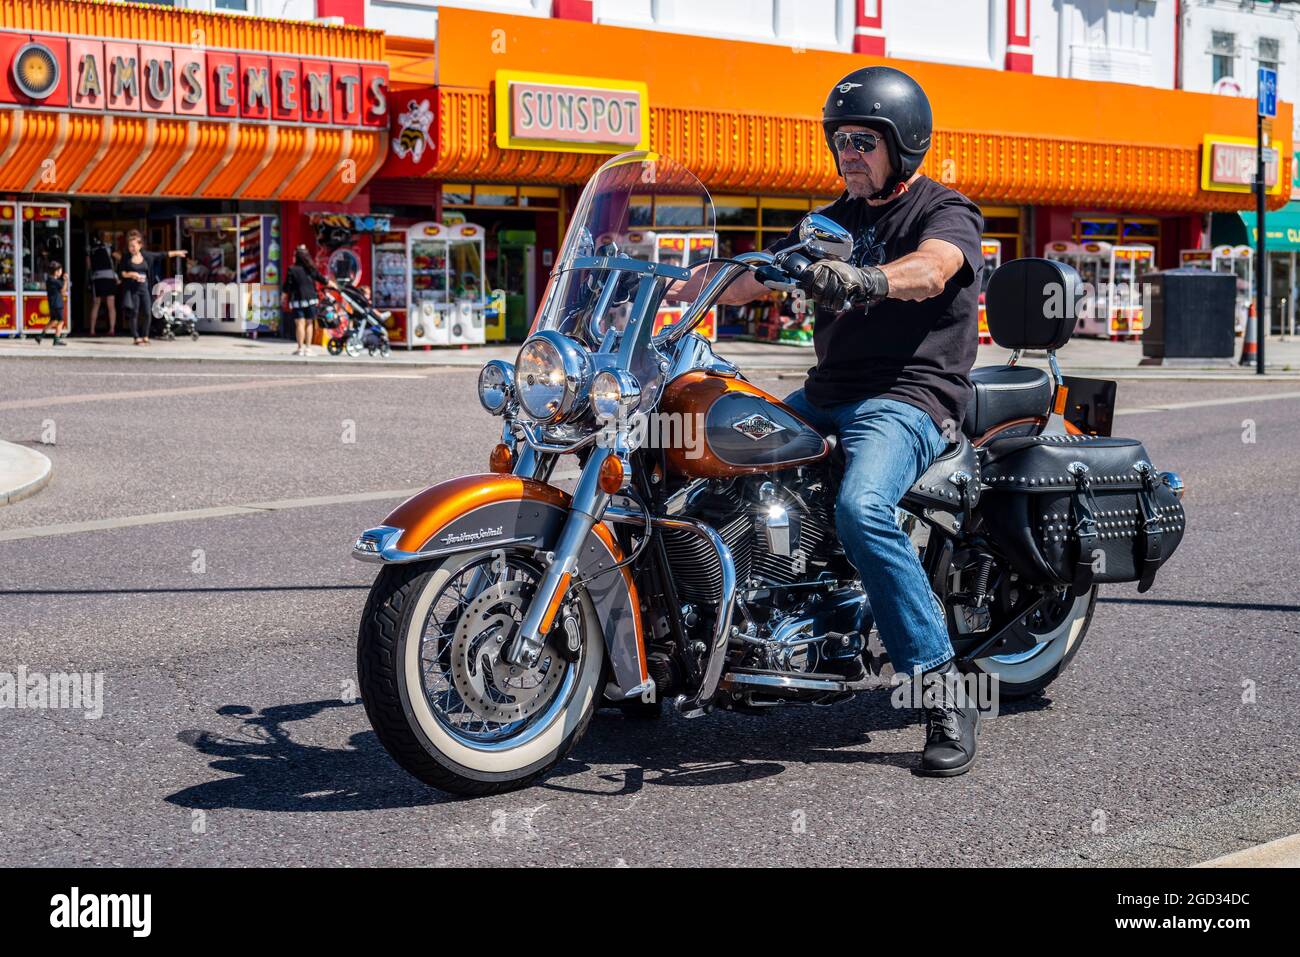 Harley Davidson Heritage Softail Motorcycle On Marine Parade Southend On Sea Essex Uk Past Seafront Amusement Arcades On Bright Sunny Summer Day Stock Photo Alamy